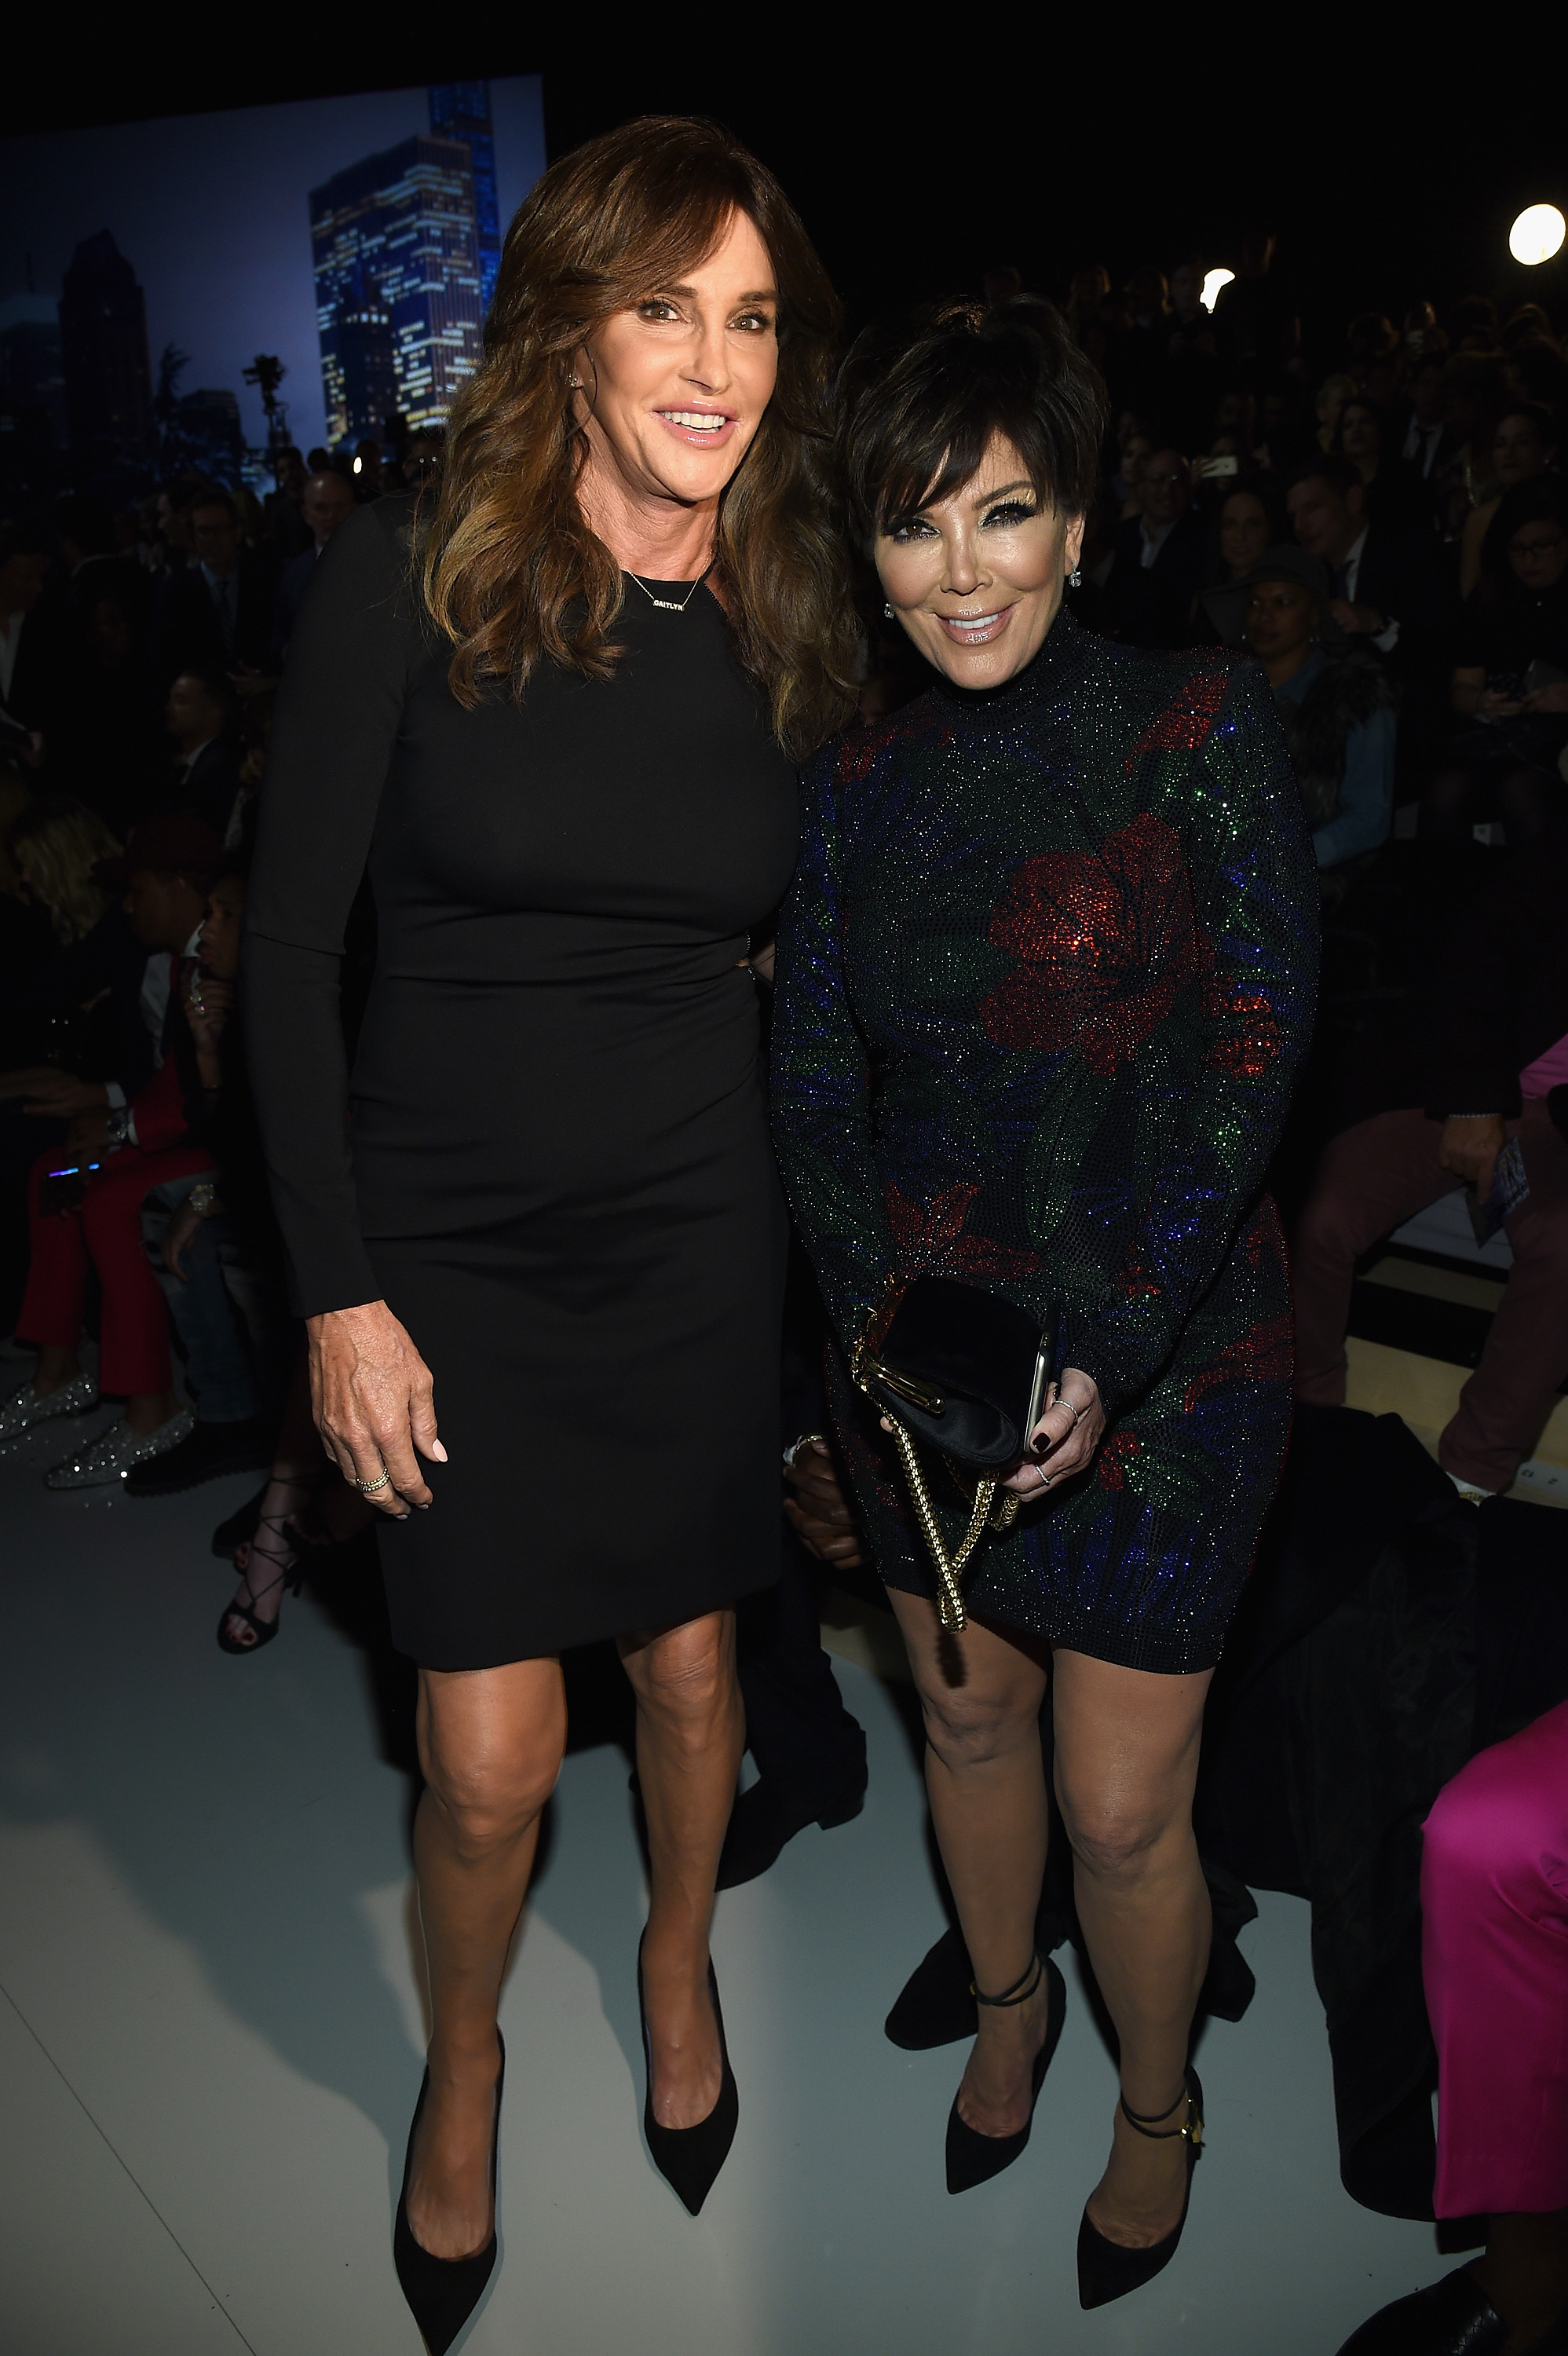 Caitlyn Jenner and Kris Jenner attend the 2015 Victoria's Secret Fashion Show at Lexington Avenue Armory on Nov. 10, 2015 in New York City.